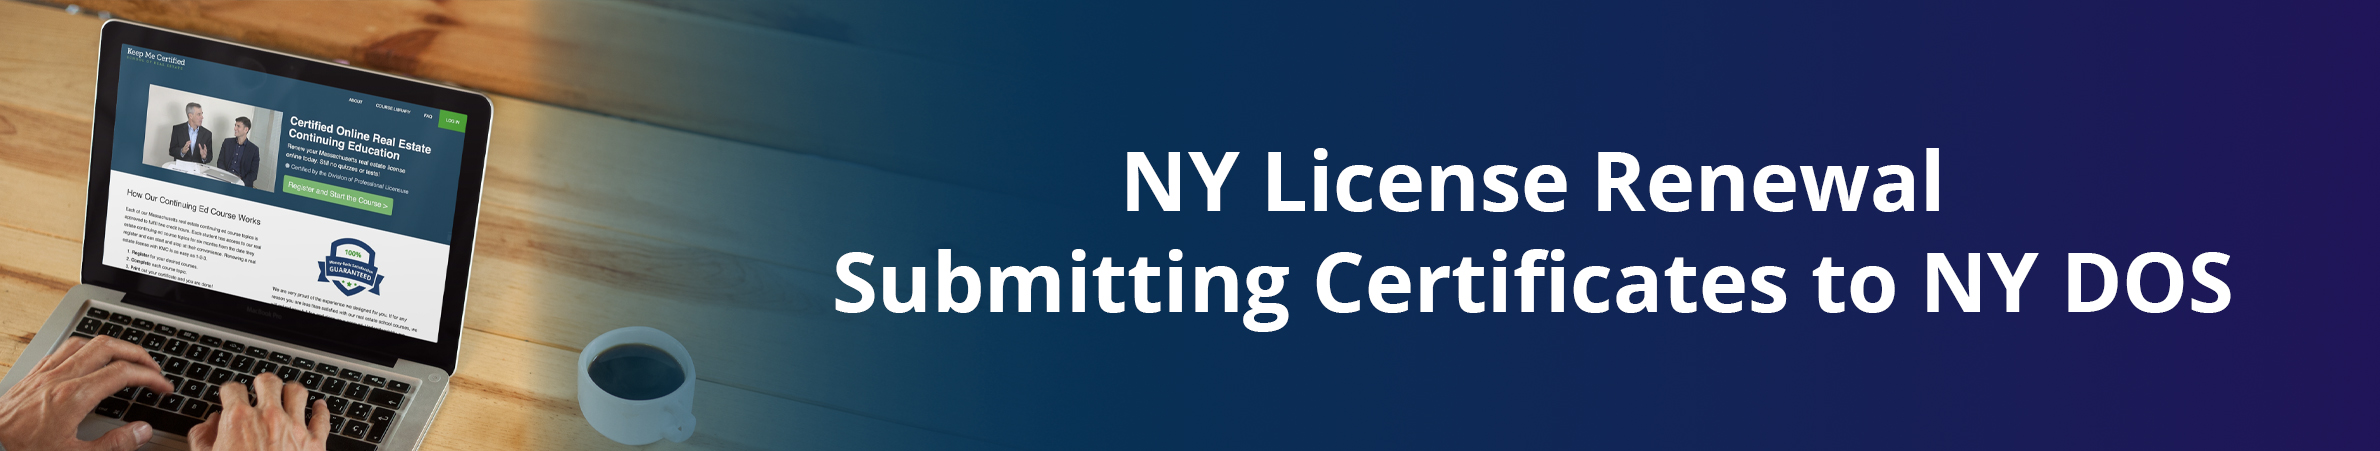 Submit CE Certificates to NY DOS